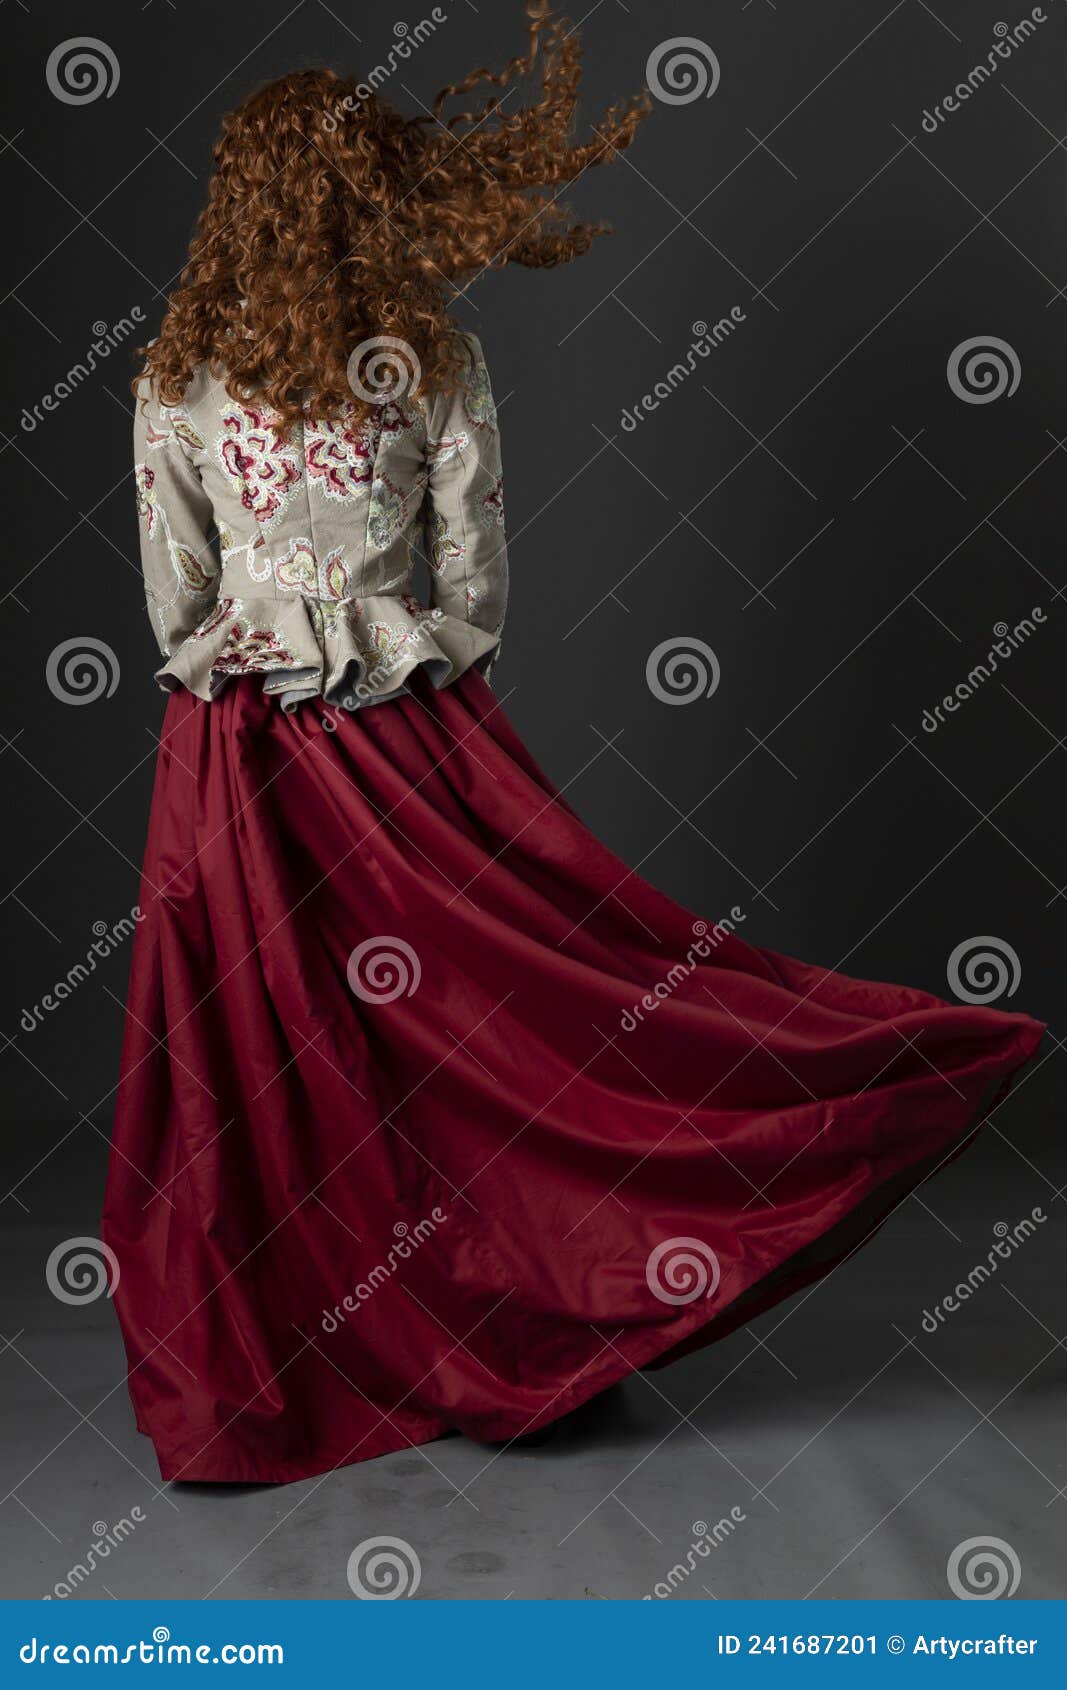 a mannequin with long curly red hair wearing a renaissance-style bodice and red skirt against a studio backdrop